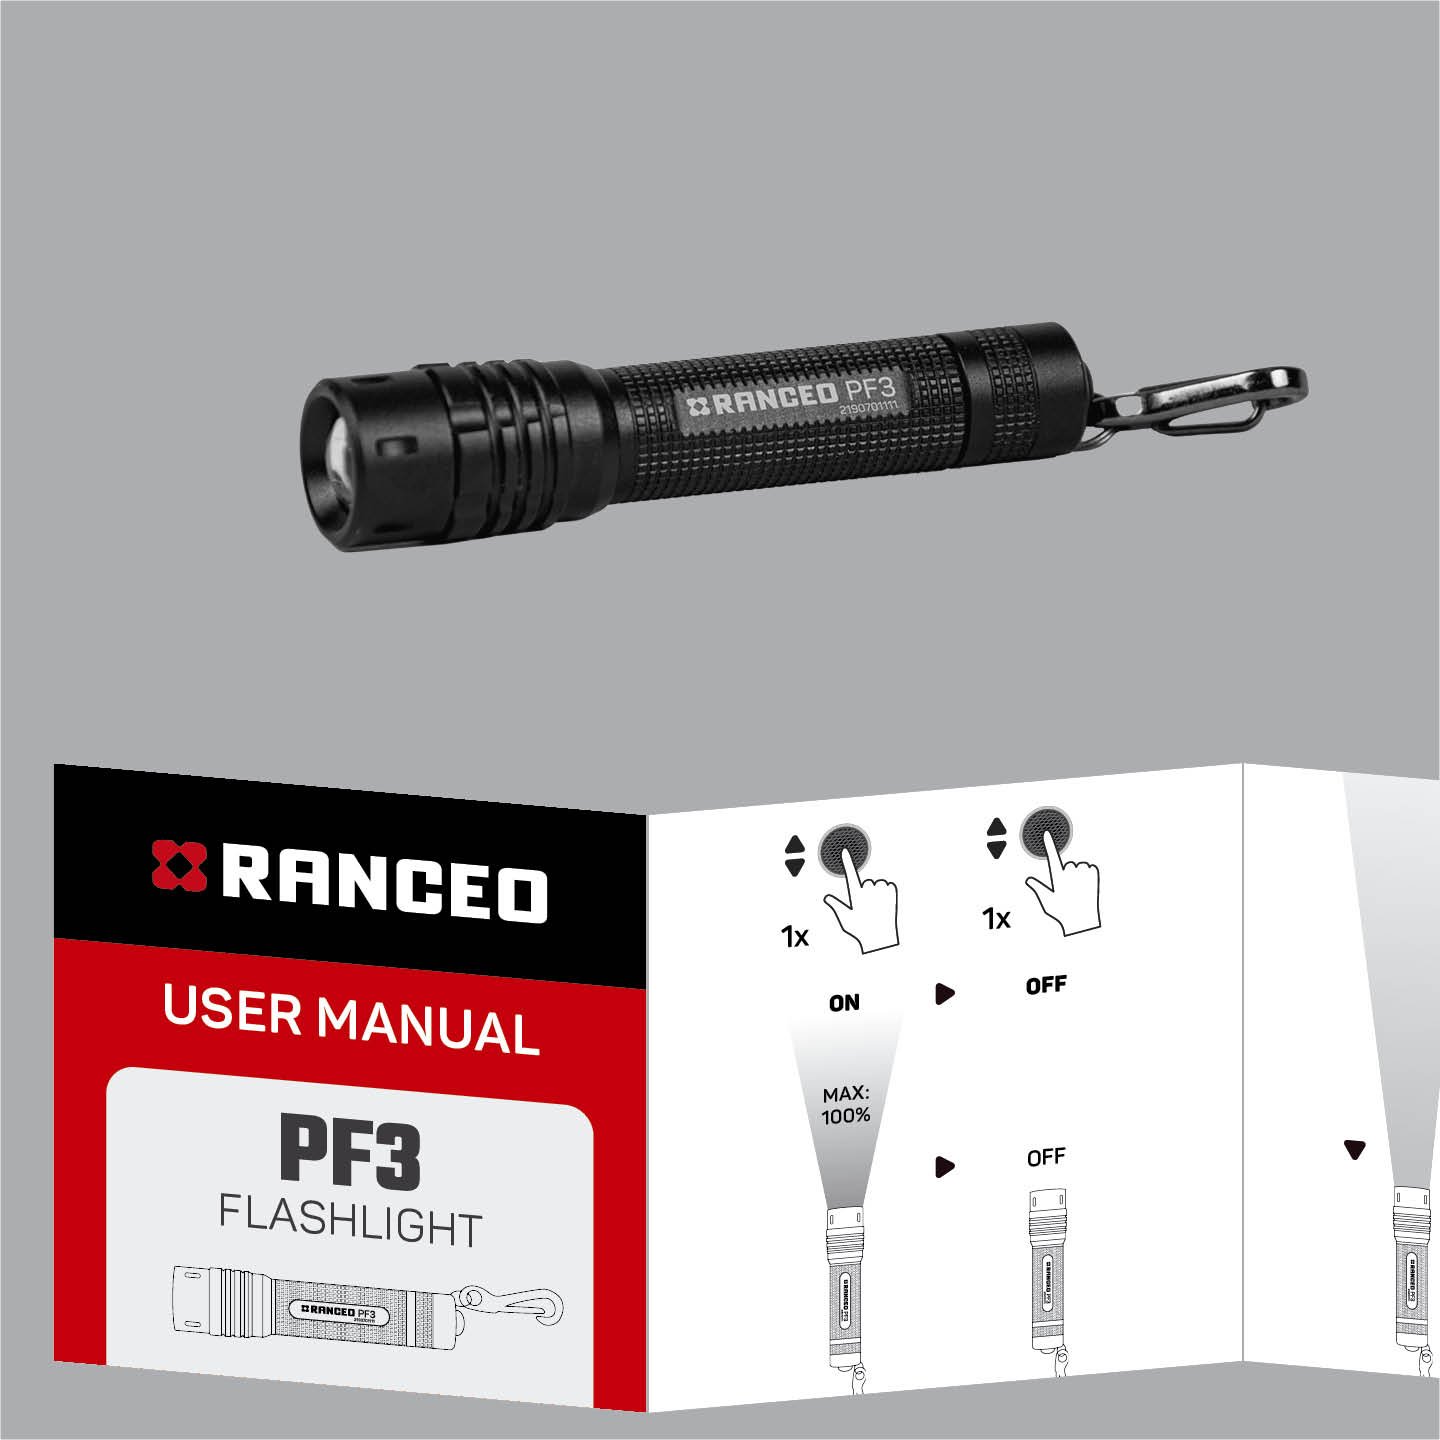 RANCEO PF3 - How to - Manual - How do I operate the keychain light and how does it work - Download download your manual here as a .pdf file